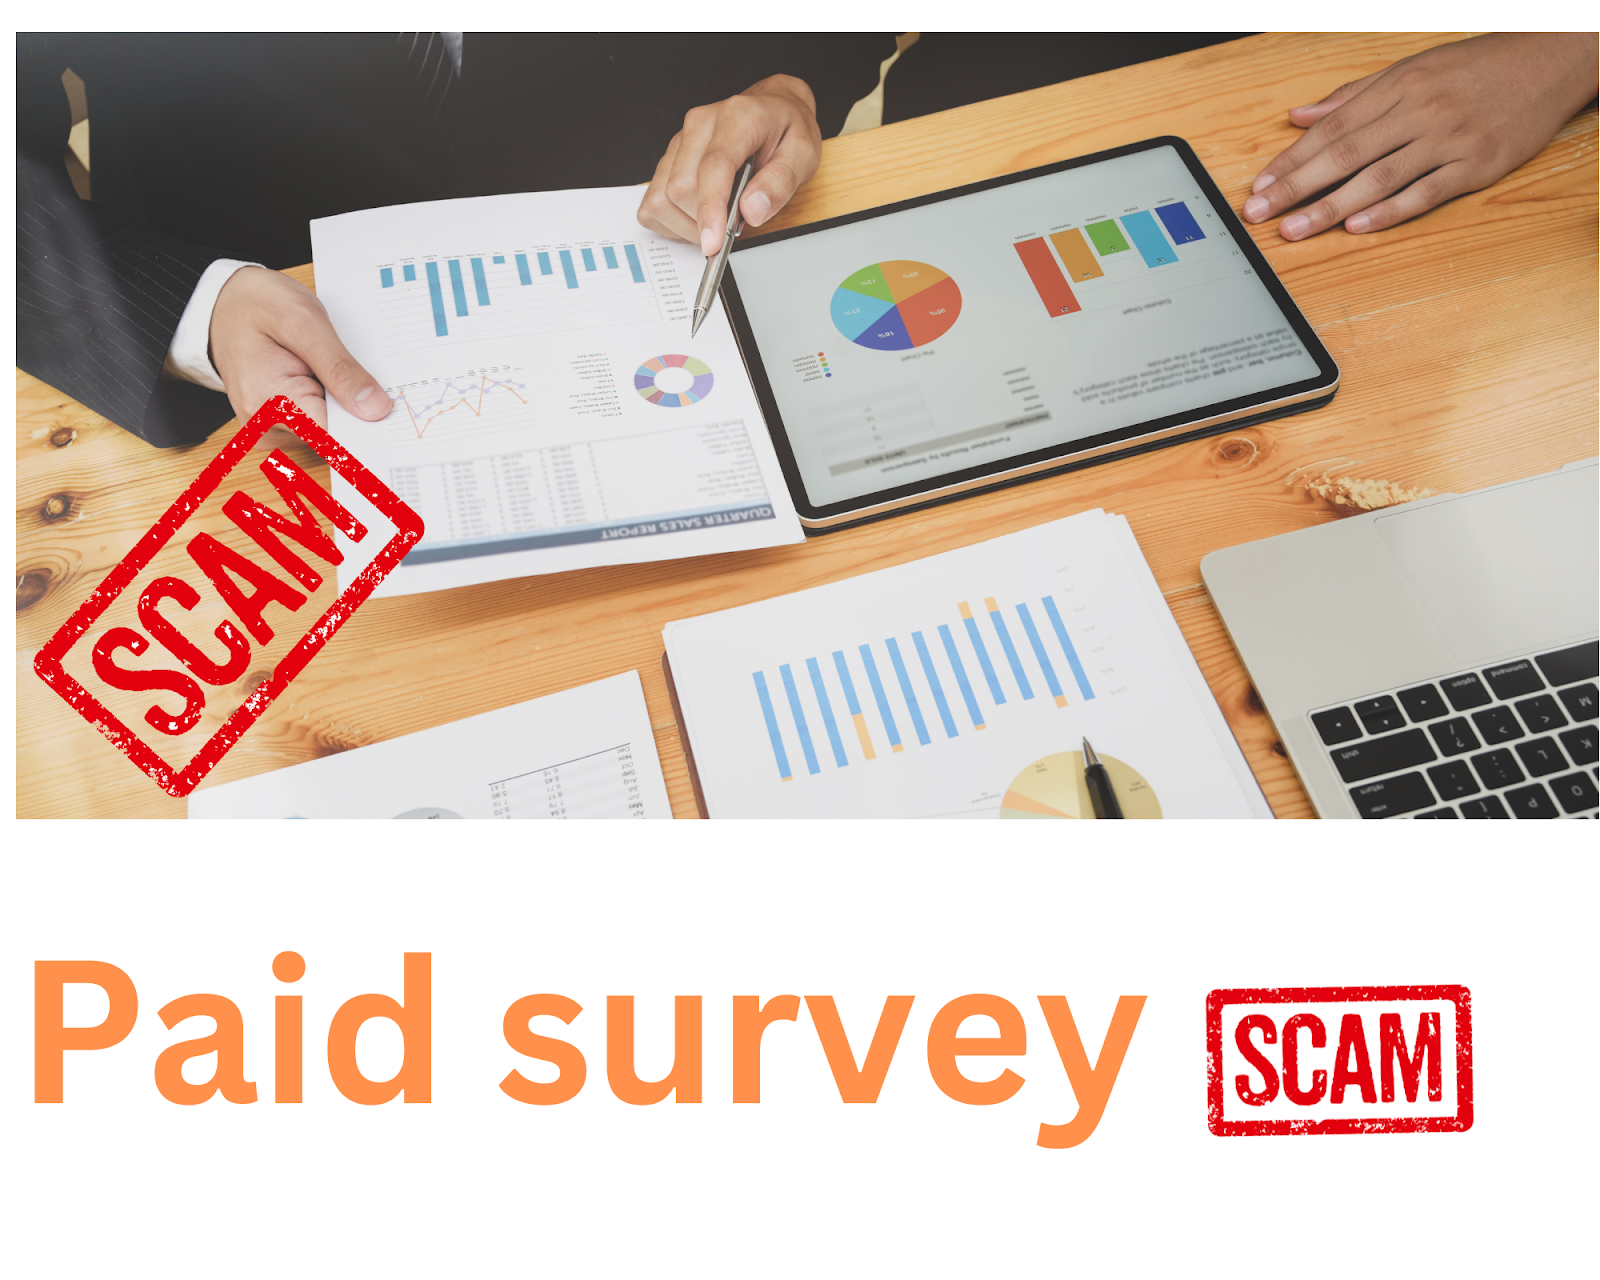 Paid survey scams